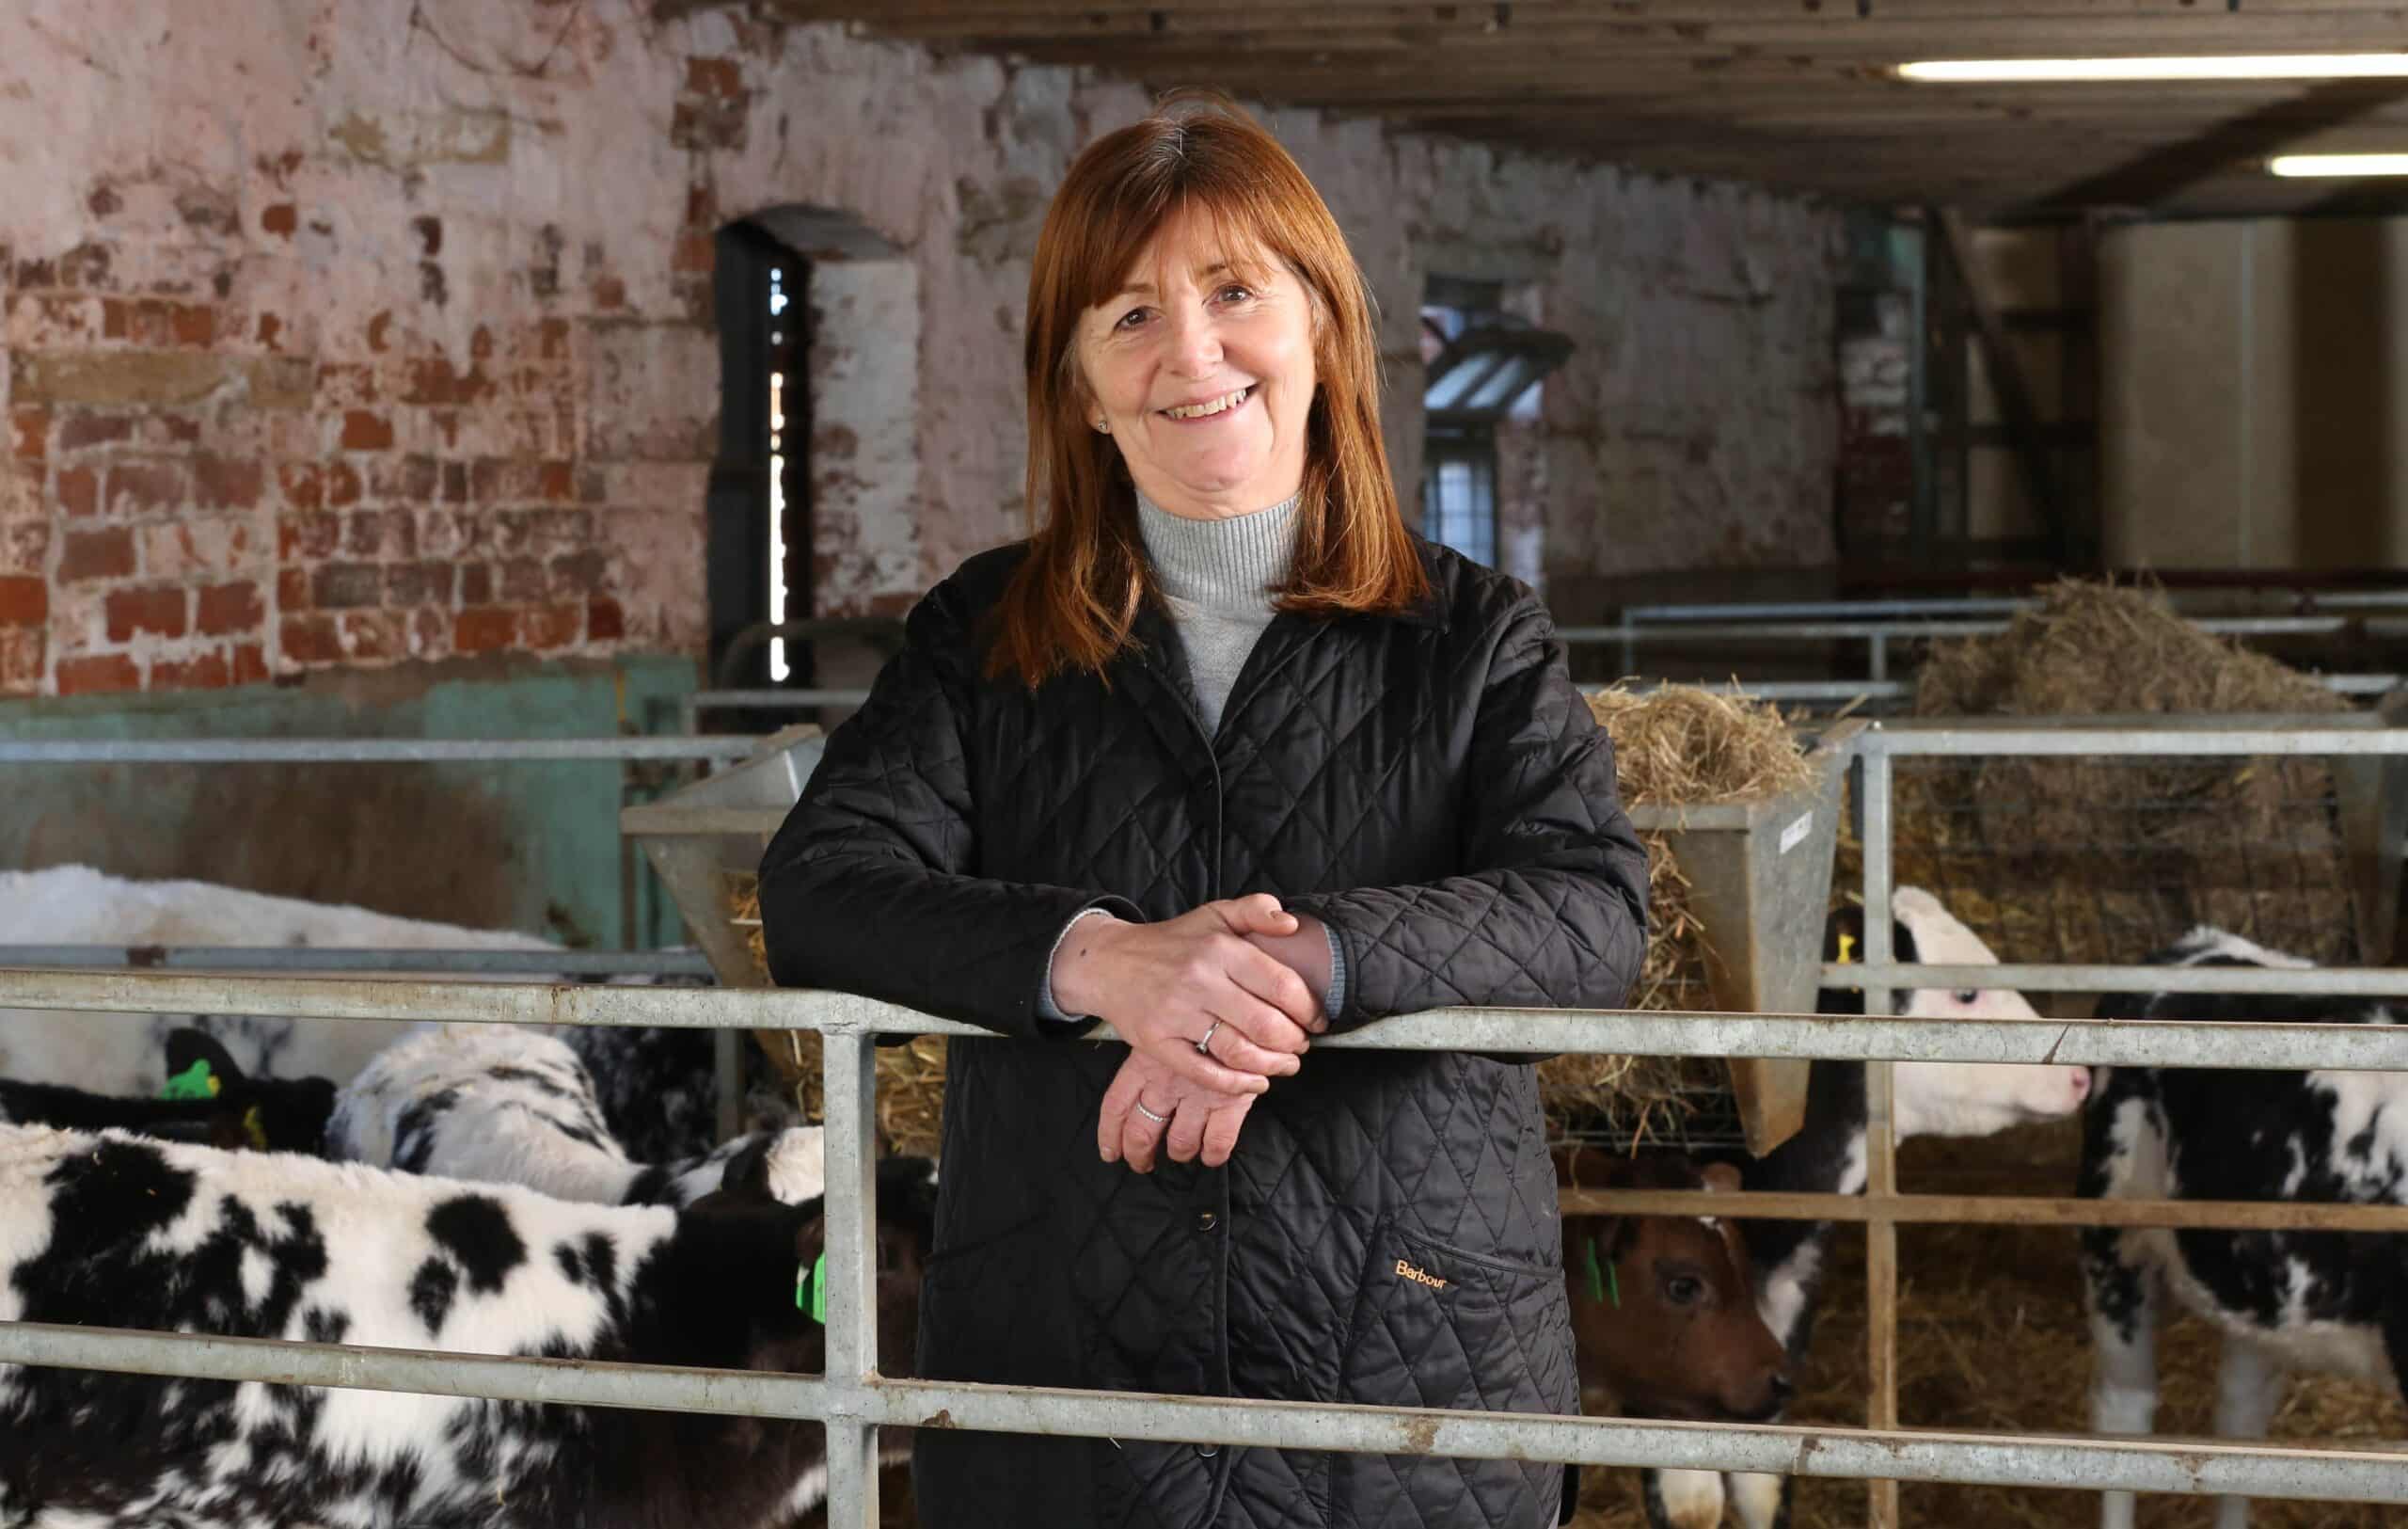 Winter Fair is ‘Chance to discuss opportunities’ and future of farming in Wales